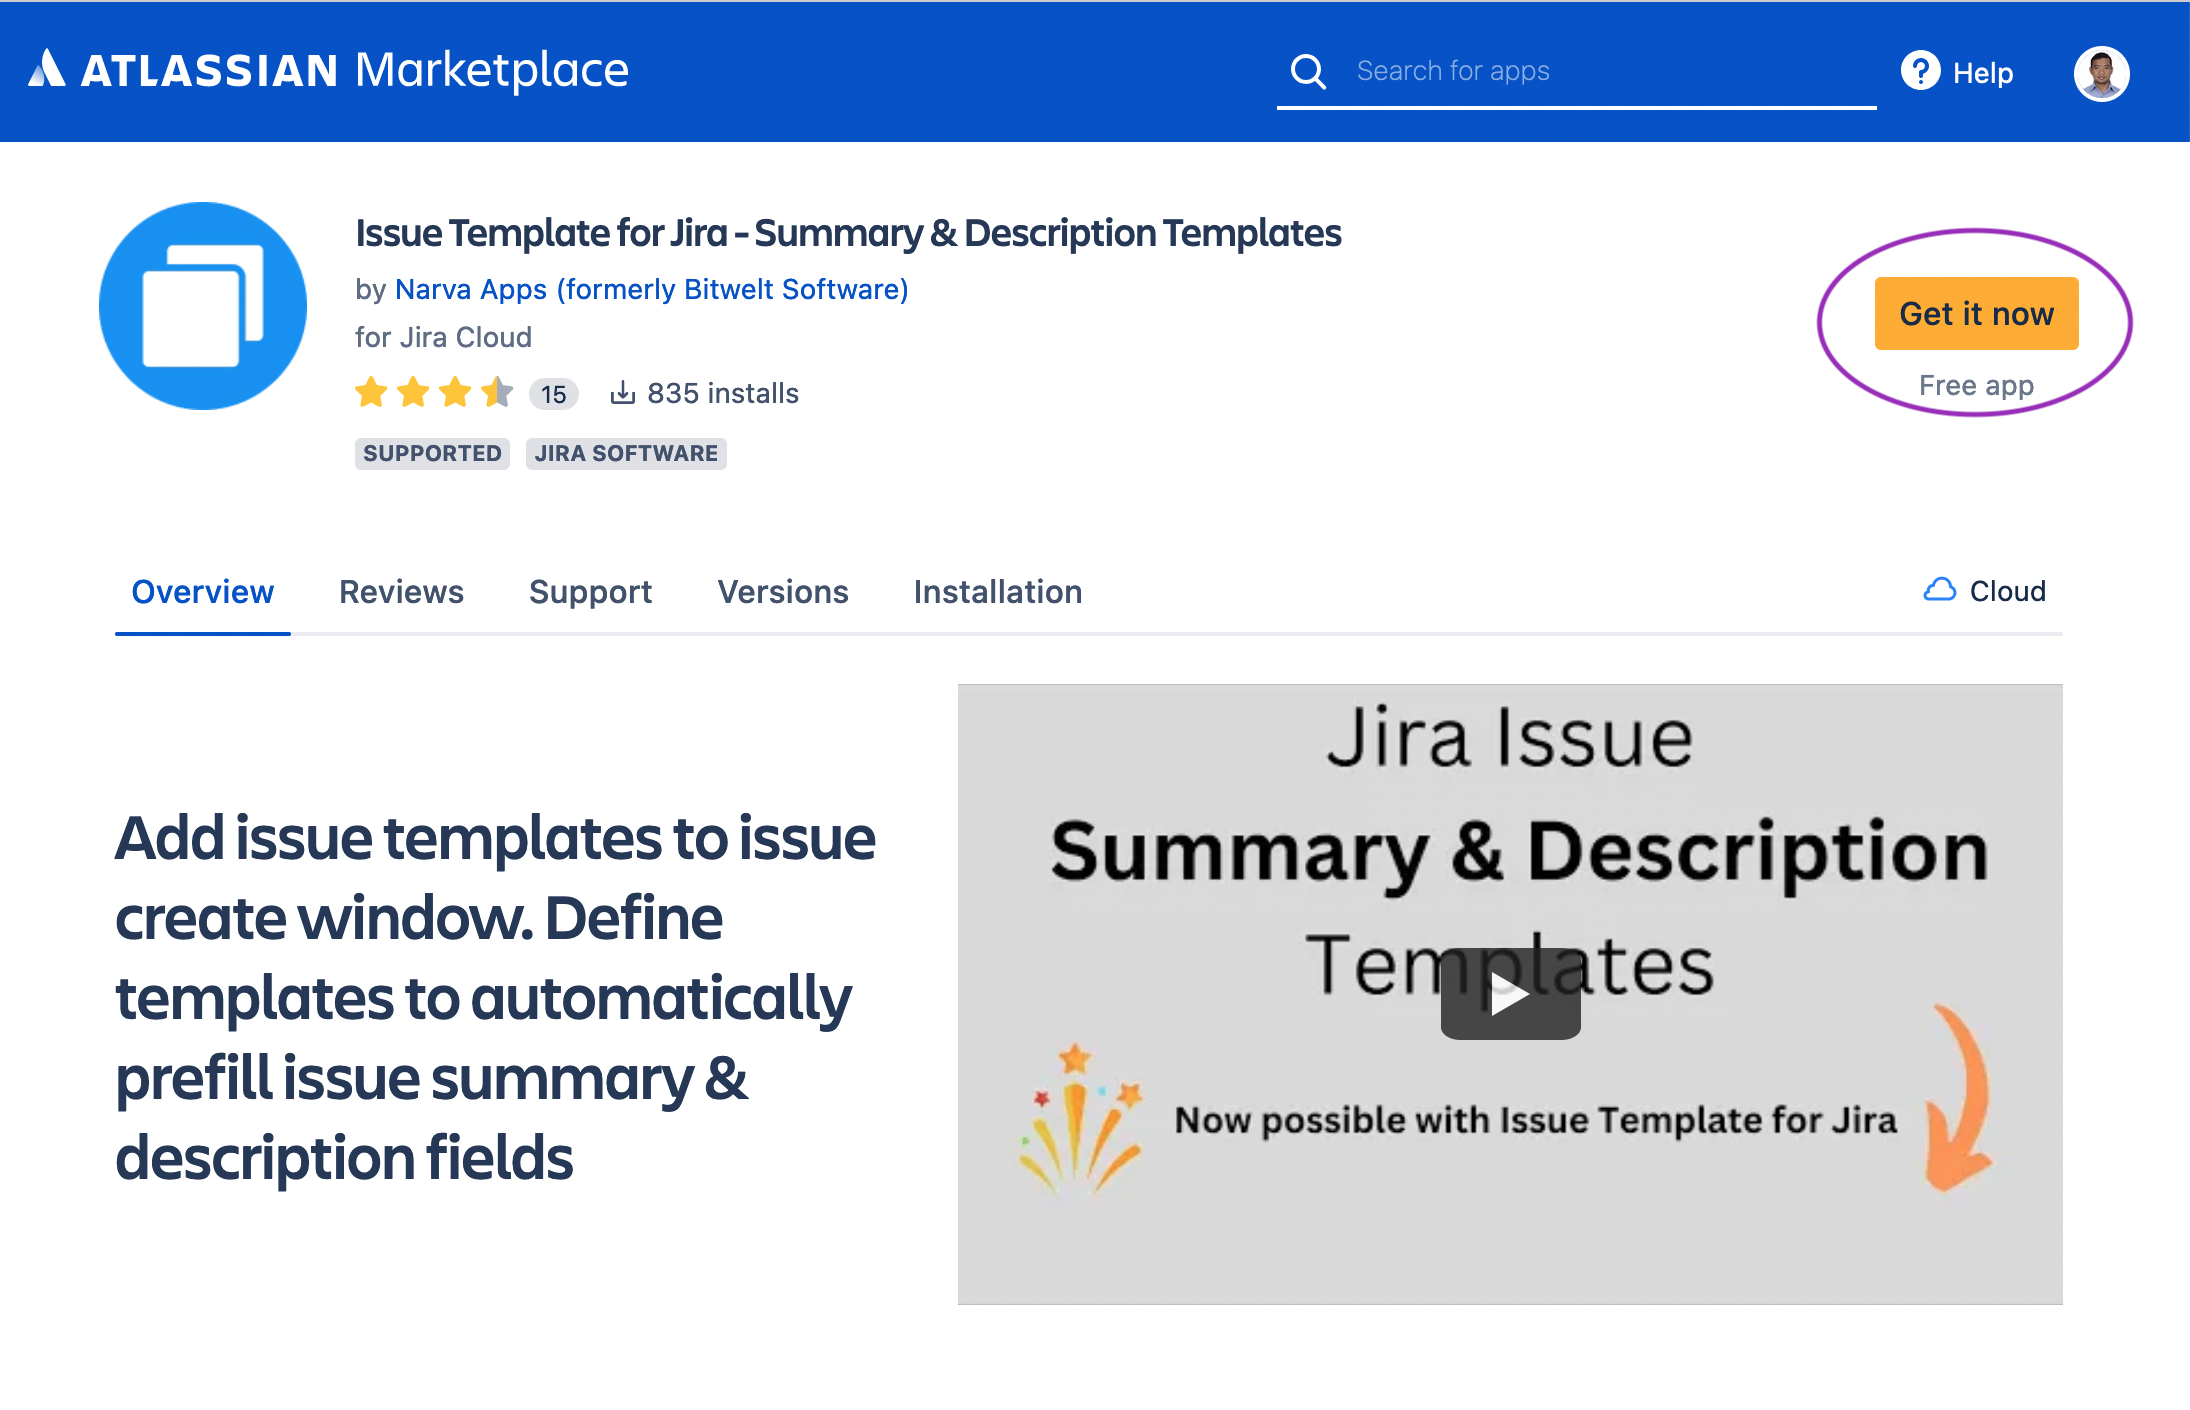 Issue Template for Jira - Atlassian Marketplace